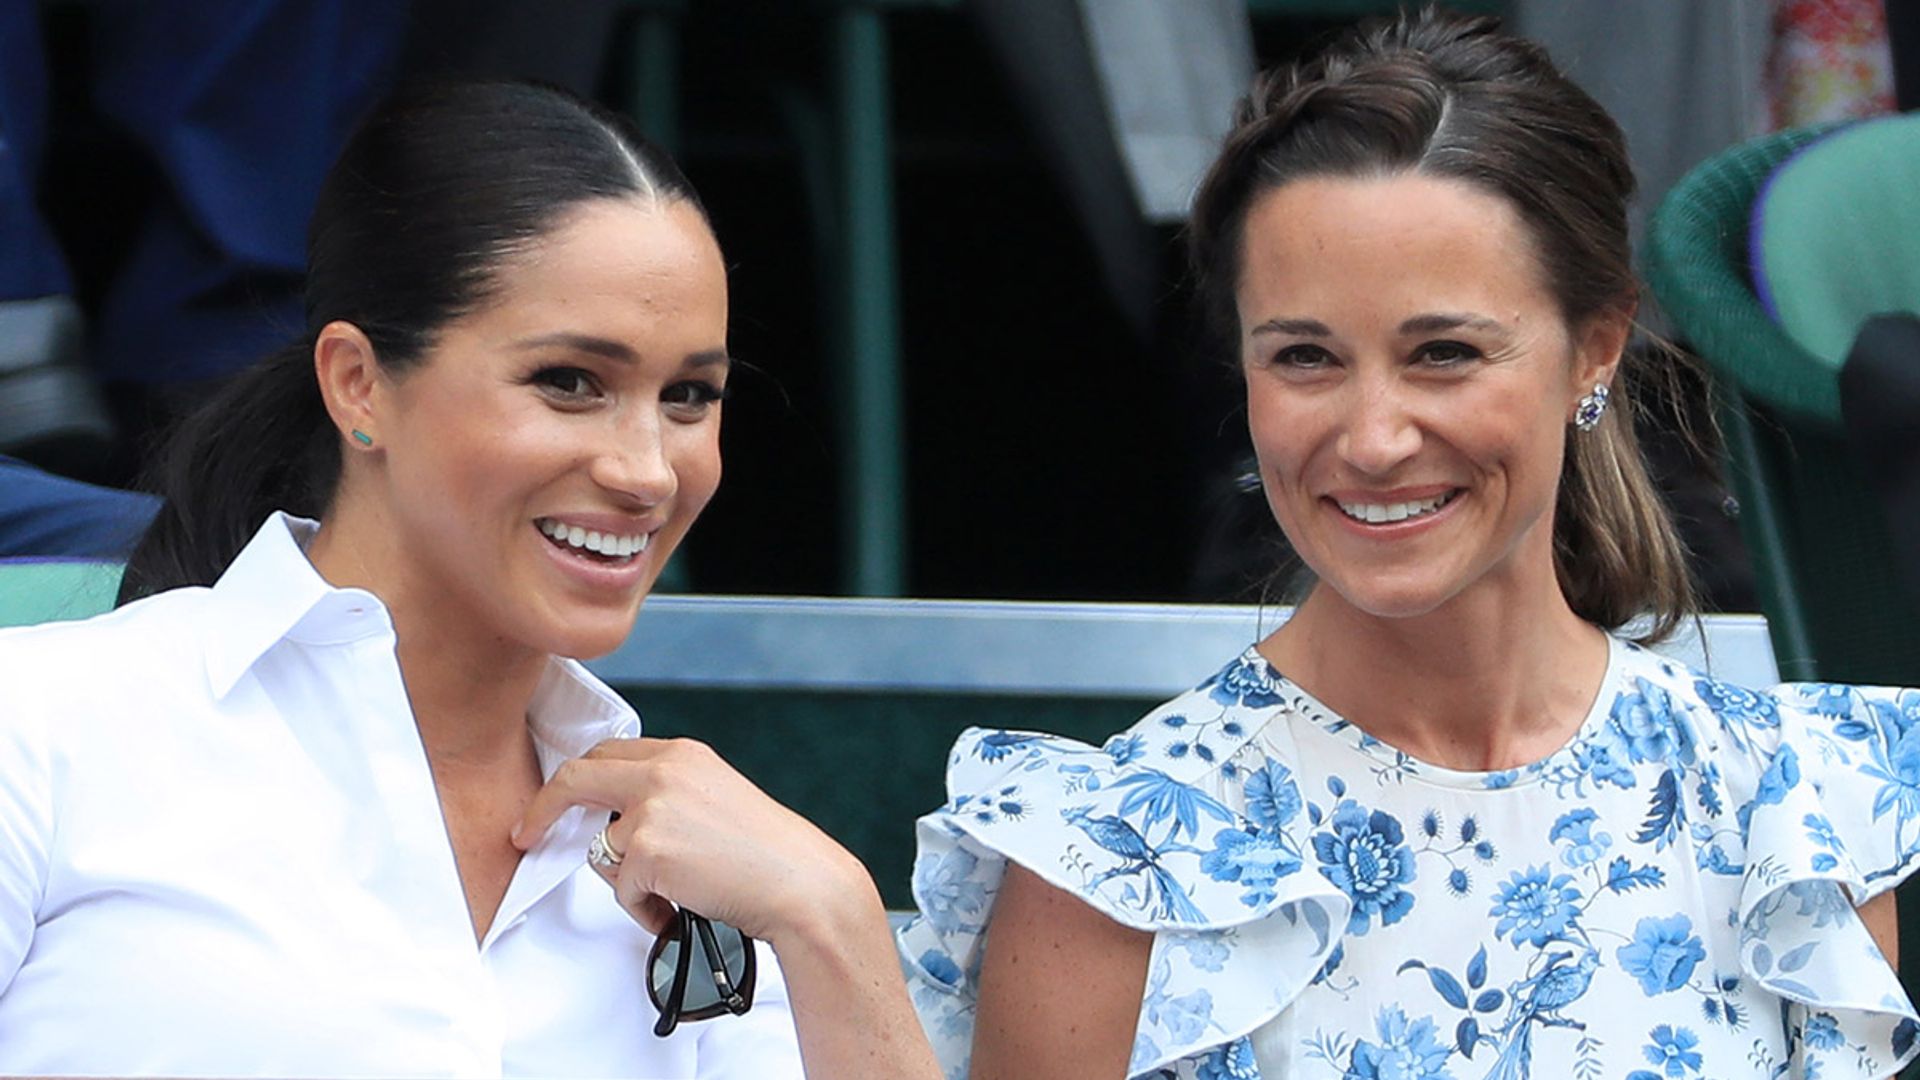 Pippa and Meghan's fave J.Crew clutch bag now comes in millennial pink